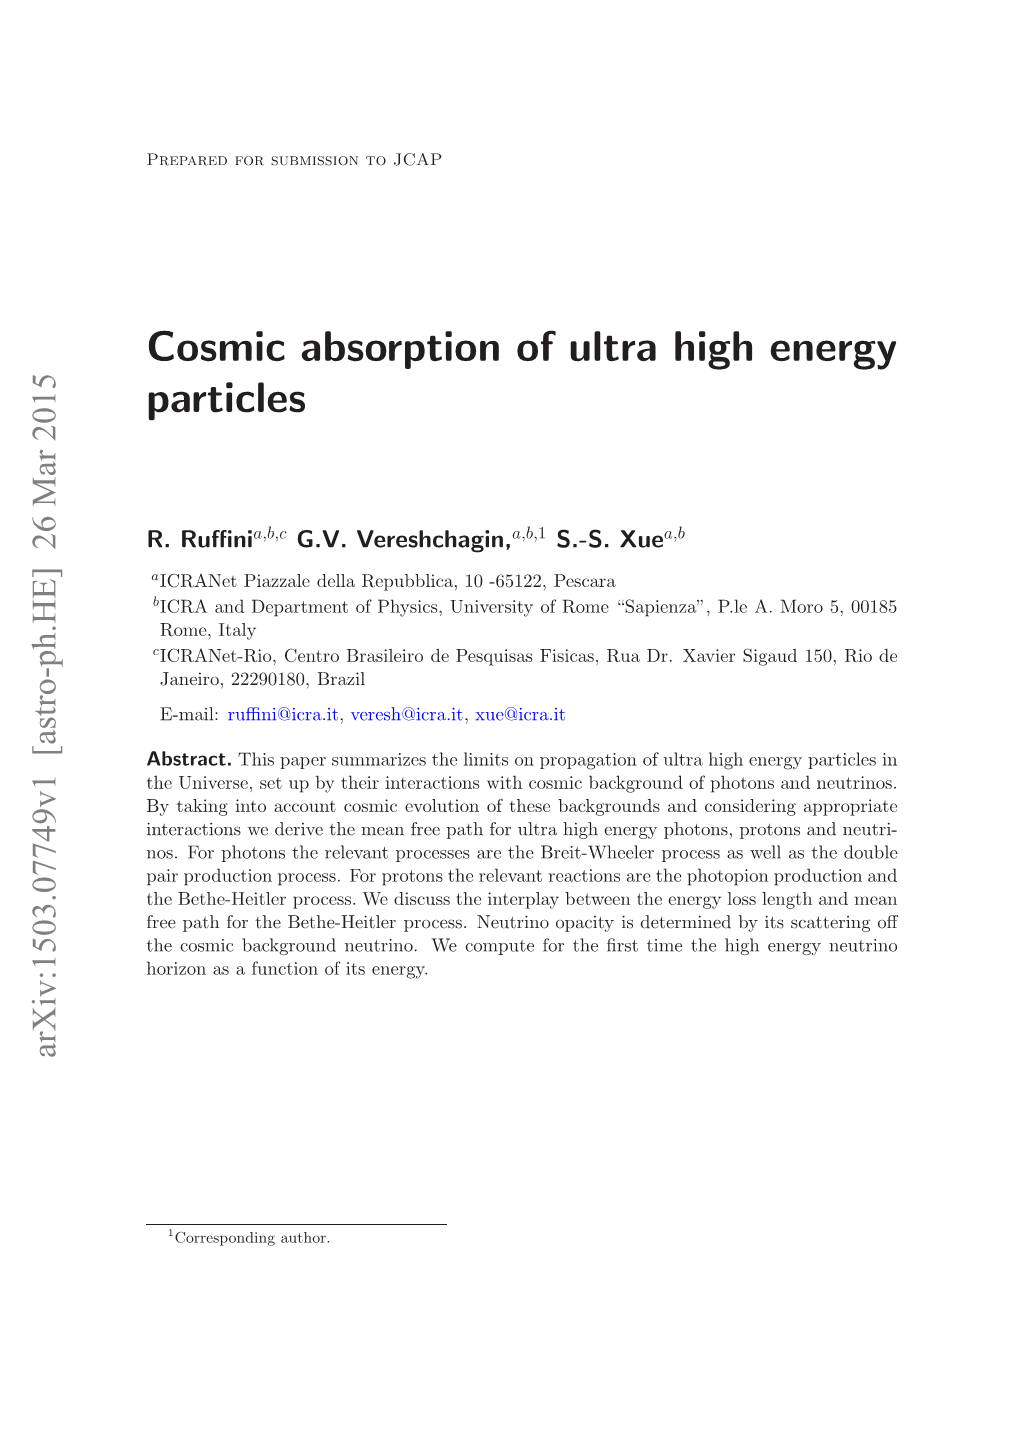 Cosmic Absorption of Ultra High Energy Particles